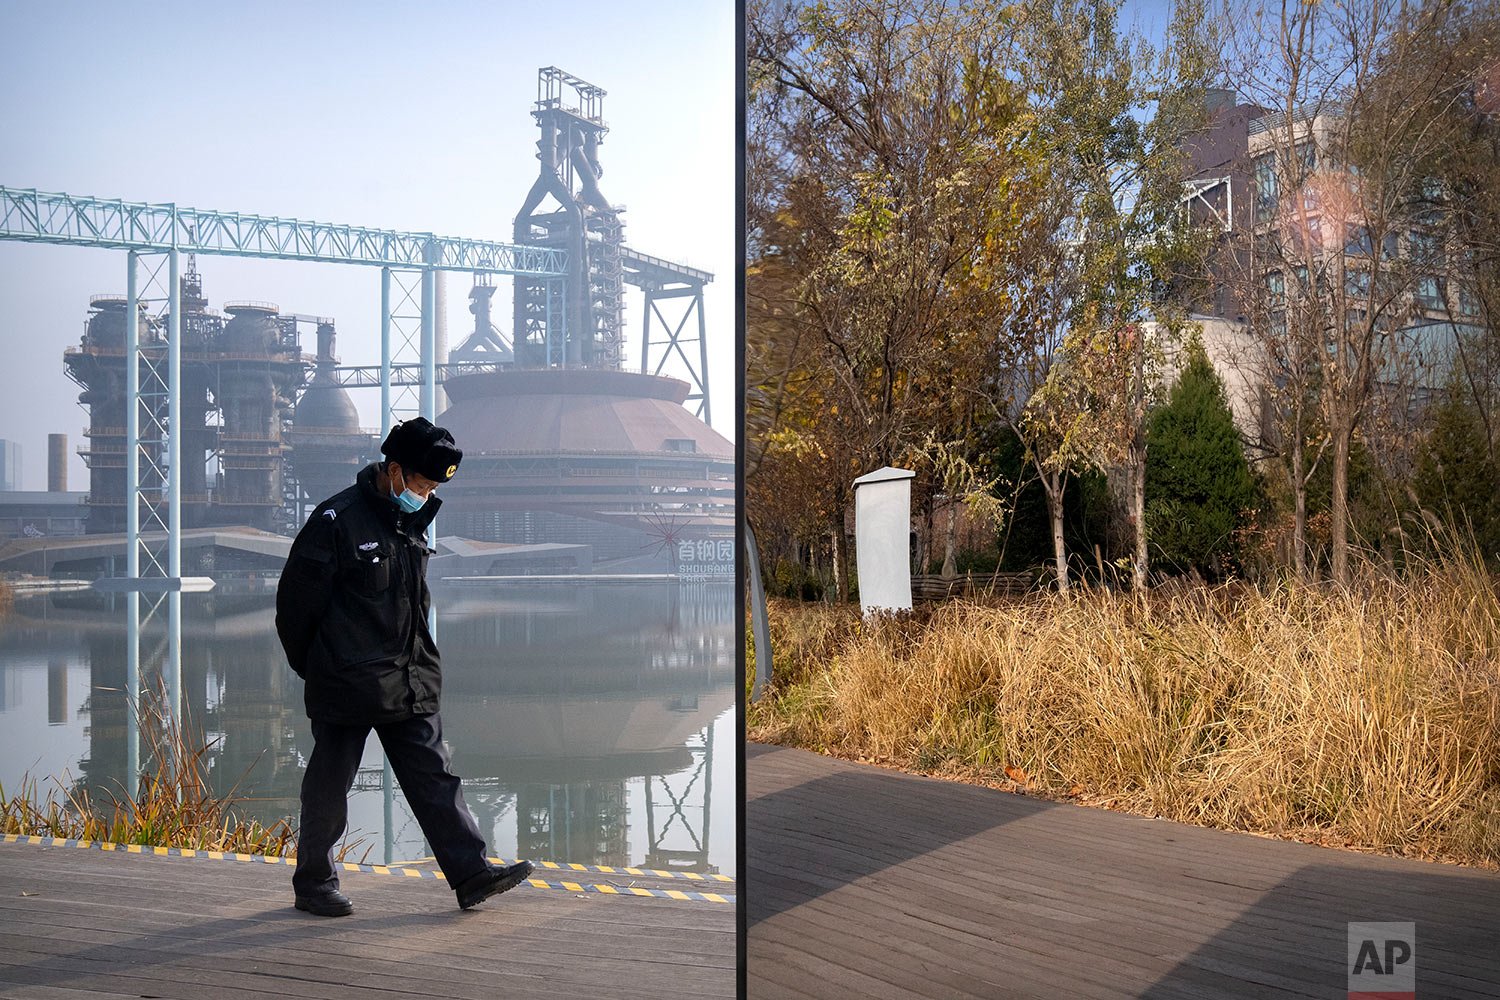  A security guard walks past a mirror at a sculpture installation, which is reflecting a nearby green space, at a public park converted from a former industrial area, on a day with high levels of air pollution in Beijing, Thursday, Nov. 18, 2021. (AP